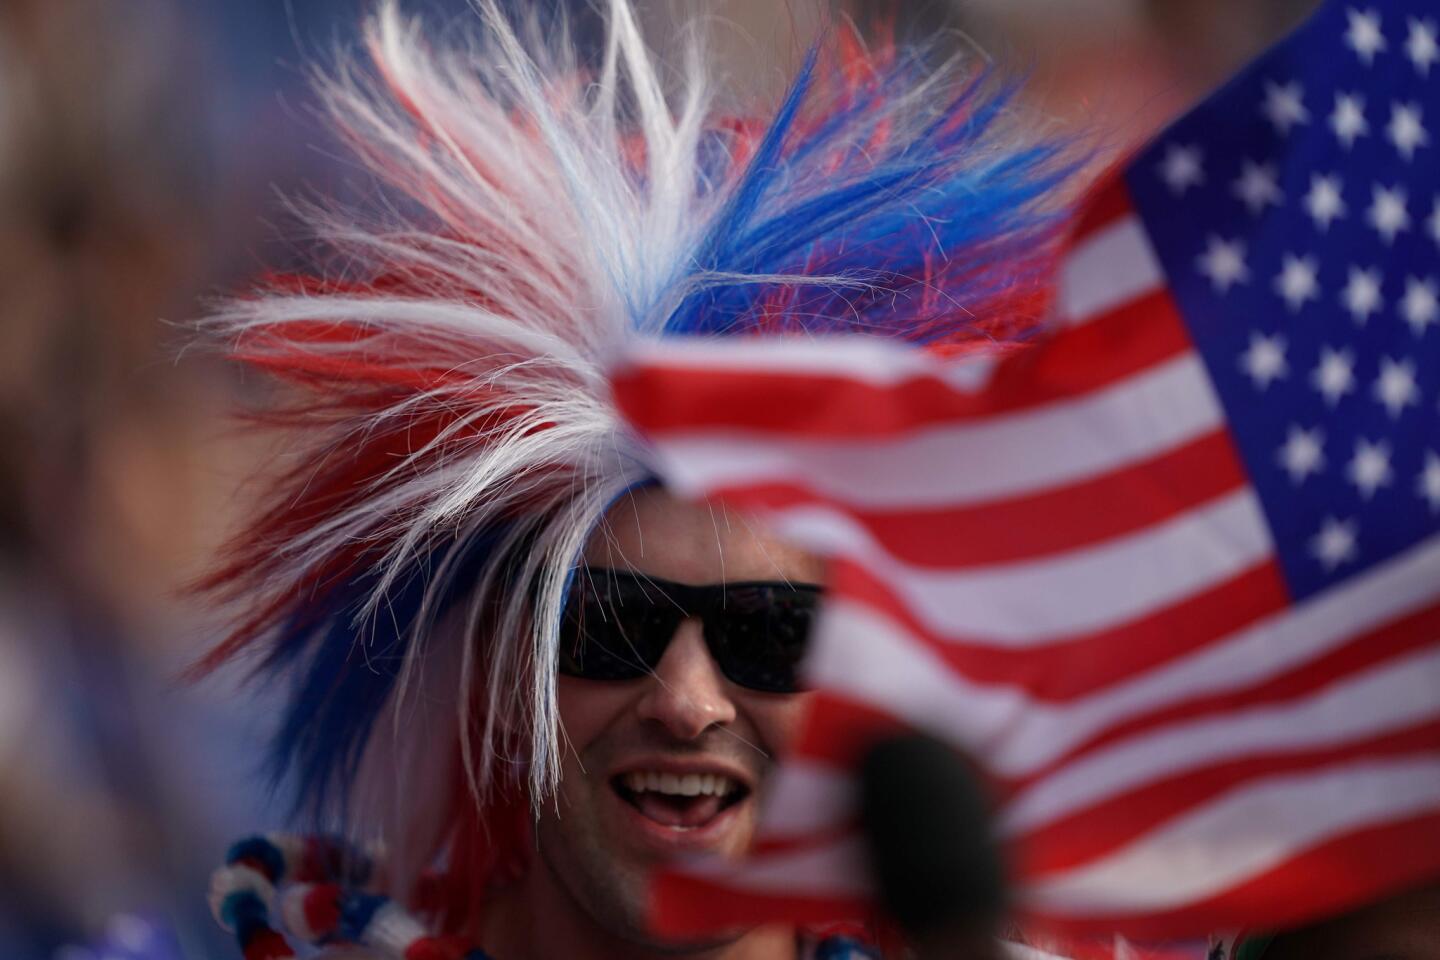 A French supporter is seen behind a U.S. flag before the United States' Women's World Cup quarterfinal against France in Paris on June 28.